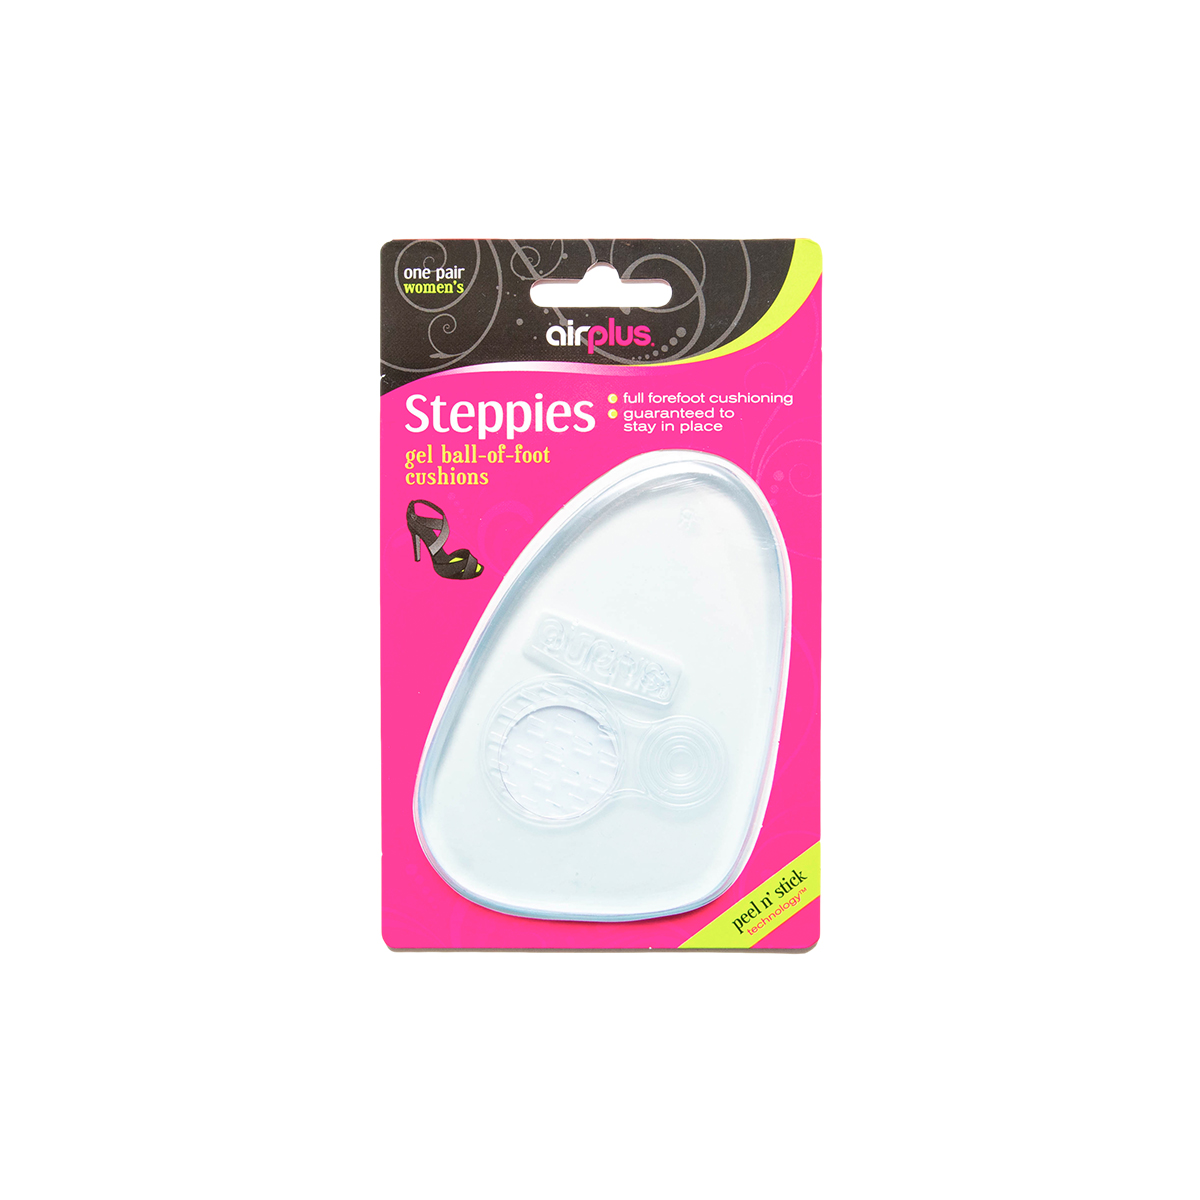 Airplus Women's Steppies Cushioned Gel Inserts, Insoles For Ball-Of-Foot - image 1 of 5